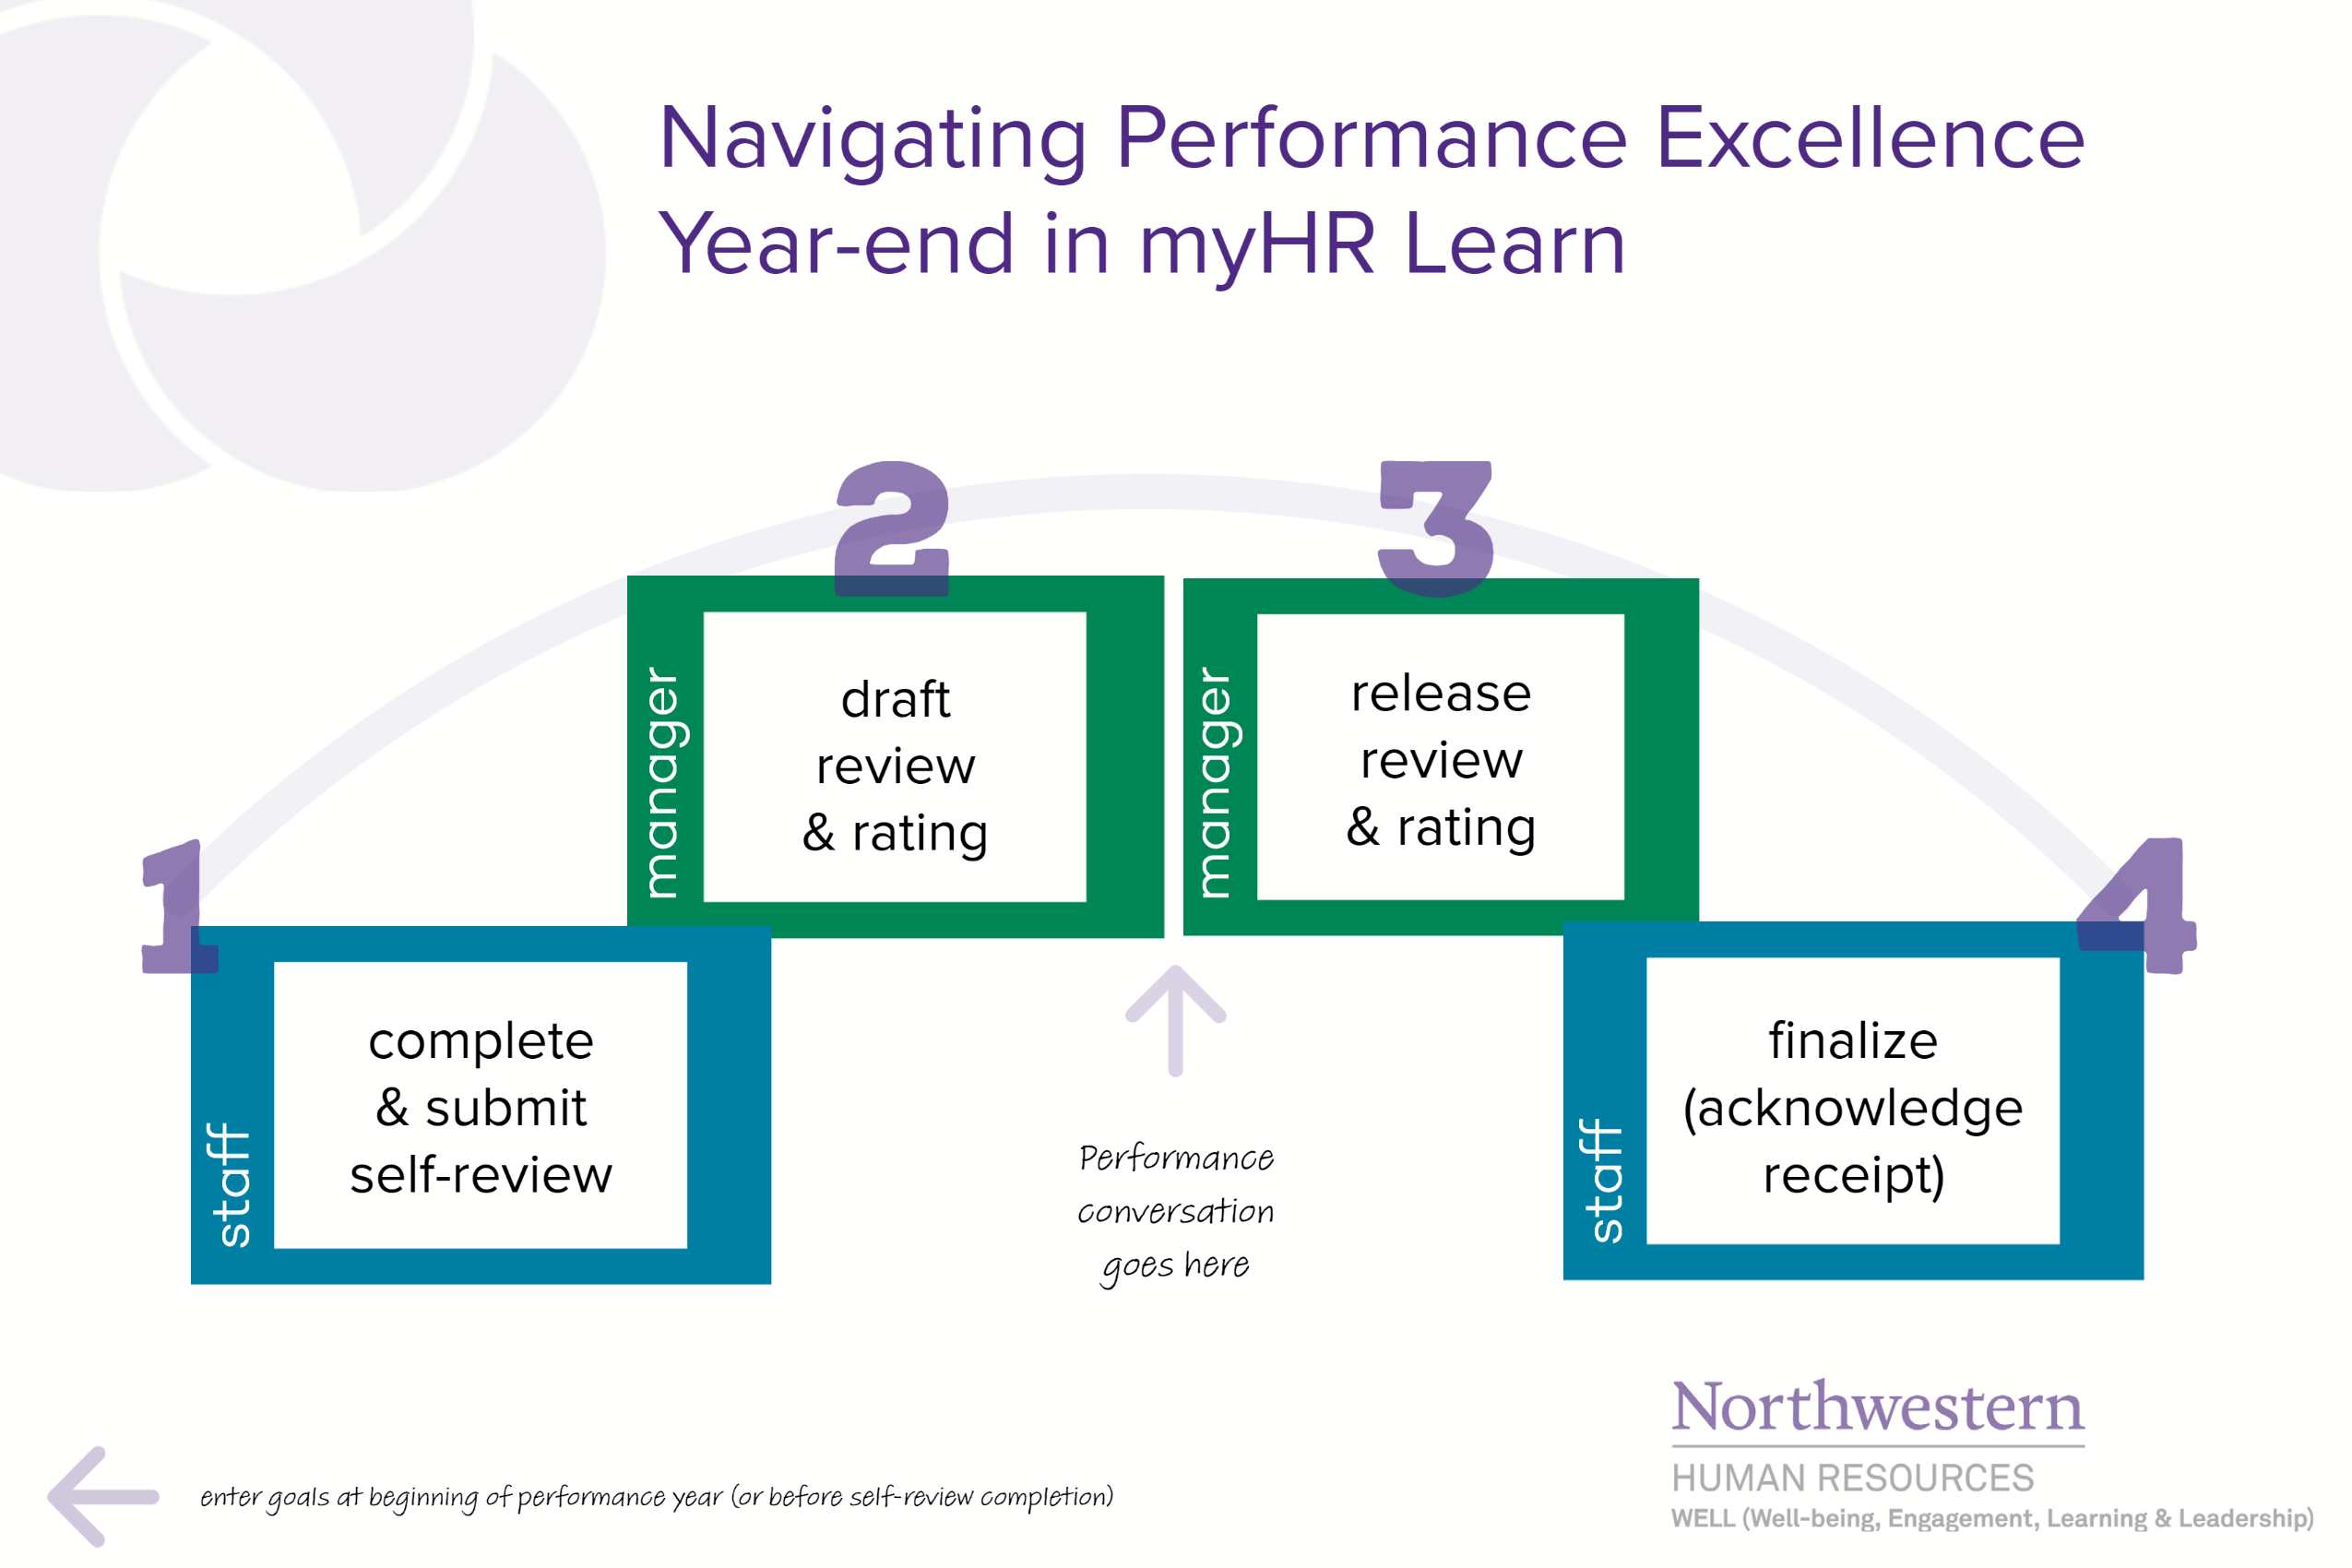 Navigating year-end in myHR Learn